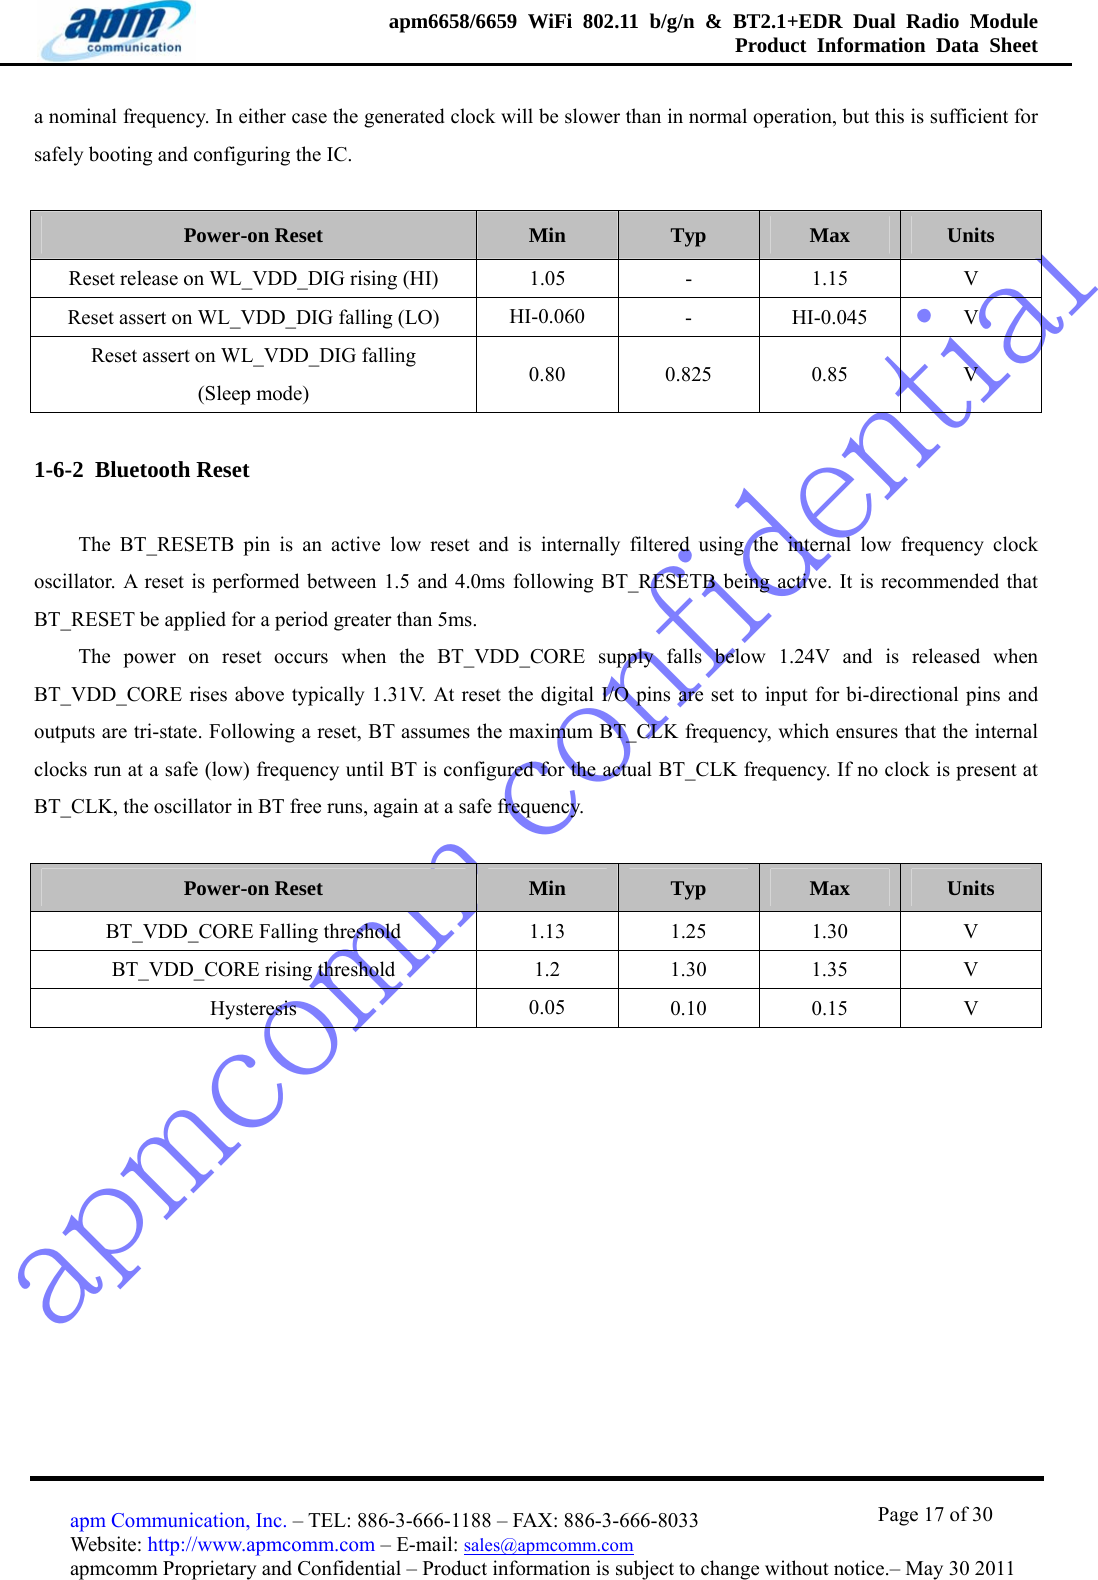 apmcomm confidentialapm6658/6659 WiFi 802.11 b/g/n &amp; BT2.1+EDR Dual Radio Module  Product Information Data Sheet                                       Page 17 of 30 apm Communication, Inc. – TEL: 886-3-666-1188 – FAX: 886-3-666-8033 Website: http://www.apmcomm.com – E-mail: sales@apmcomm.com  apmcomm Proprietary and Confidential – Product information is subject to change without notice.– May 30 2011 a nominal frequency. In either case the generated clock will be slower than in normal operation, but this is sufficient for safely booting and configuring the IC.  Power-on Reset Min Typ Max Units Reset release on WL_VDD_DIG rising (HI)  1.05  -  1.15  V Reset assert on WL_VDD_DIG falling (LO)  HI-0.060  - HI-0.045 V Reset assert on WL_VDD_DIG falling         (Sleep mode) 0.80  0.825 0.85  V 1-6-2  Bluetooth Reset The BT_RESETB pin is an active low reset and is internally filtered using the internal low frequency clock oscillator. A reset is performed between 1.5 and 4.0ms following BT_RESETB being active. It is recommended that BT_RESET be applied for a period greater than 5ms. The power on reset occurs when the BT_VDD_CORE supply falls below 1.24V and is released when BT_VDD_CORE rises above typically 1.31V. At reset the digital I/O pins are set to input for bi-directional pins and outputs are tri-state. Following a reset, BT assumes the maximum BT_CLK frequency, which ensures that the internal clocks run at a safe (low) frequency until BT is configured for the actual BT_CLK frequency. If no clock is present at BT_CLK, the oscillator in BT free runs, again at a safe frequency.  Power-on Reset Min Typ Max Units BT_VDD_CORE Falling threshold  1.13  1.25  1.30  V BT_VDD_CORE rising threshold  1.2  1.30 1.35  V Hysteresis  0.05  0.10 0.15  V 